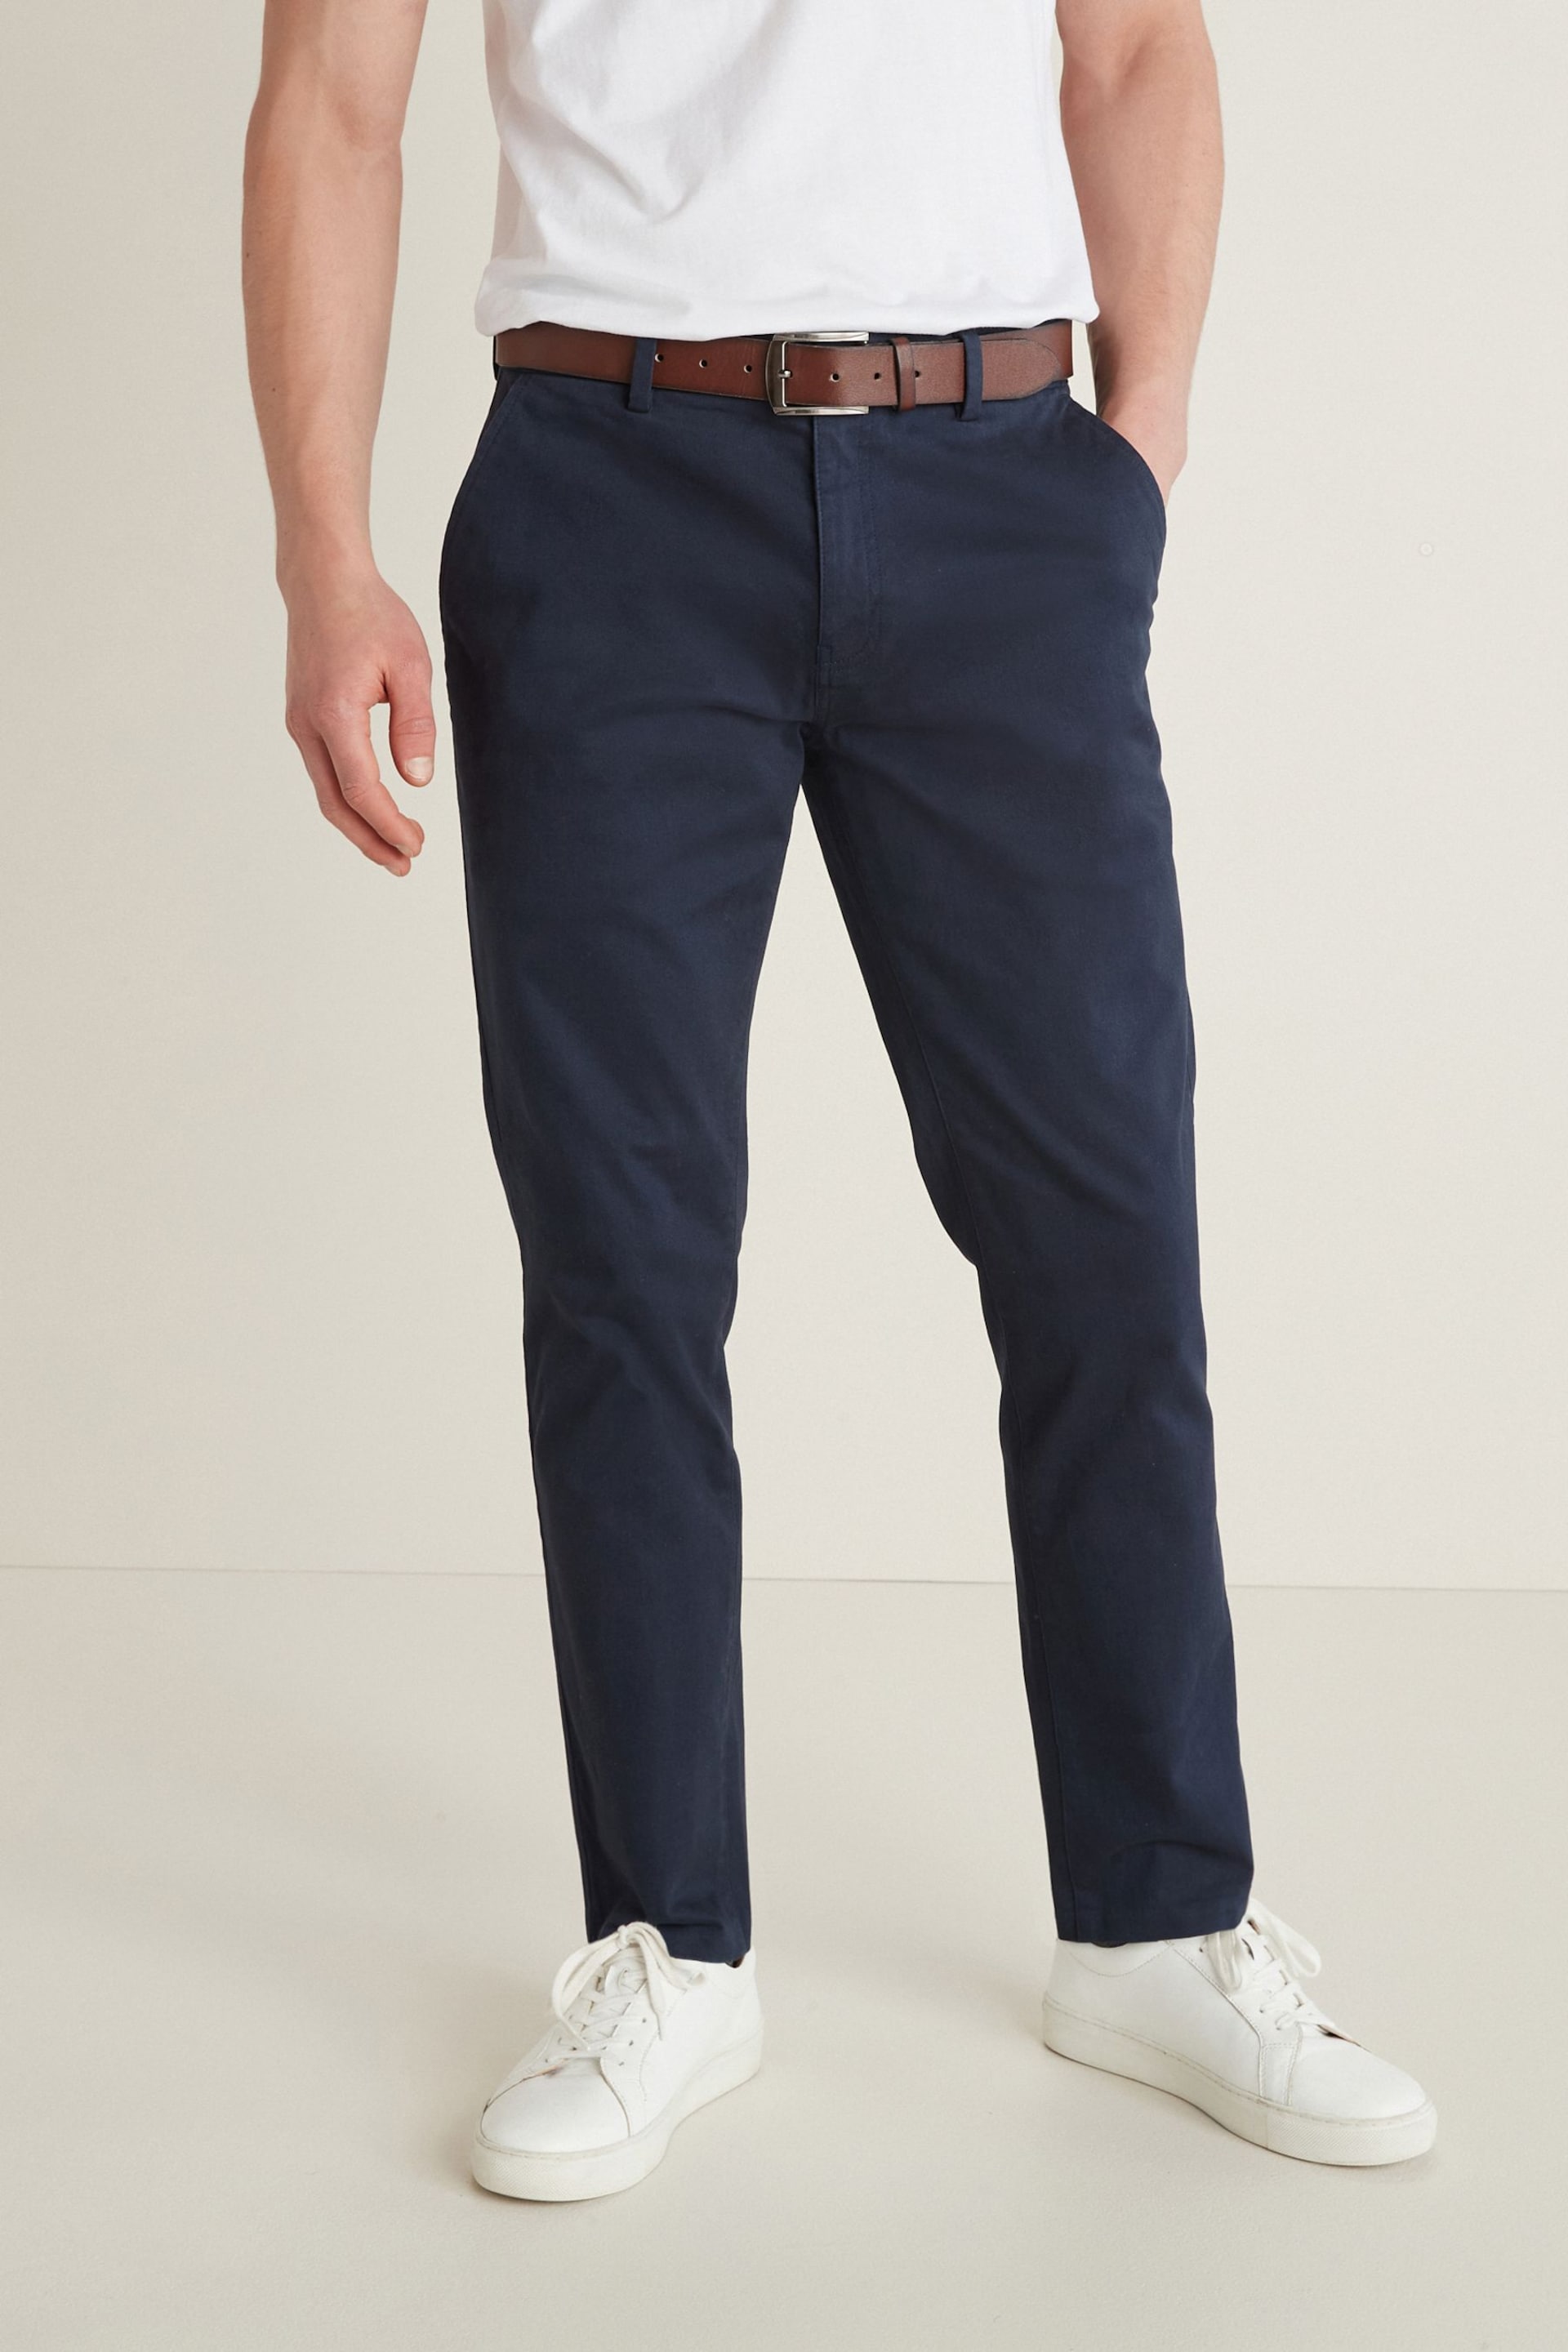 Navy Blue Slim Fit Belted Soft Touch Chino Trousers - Image 1 of 8